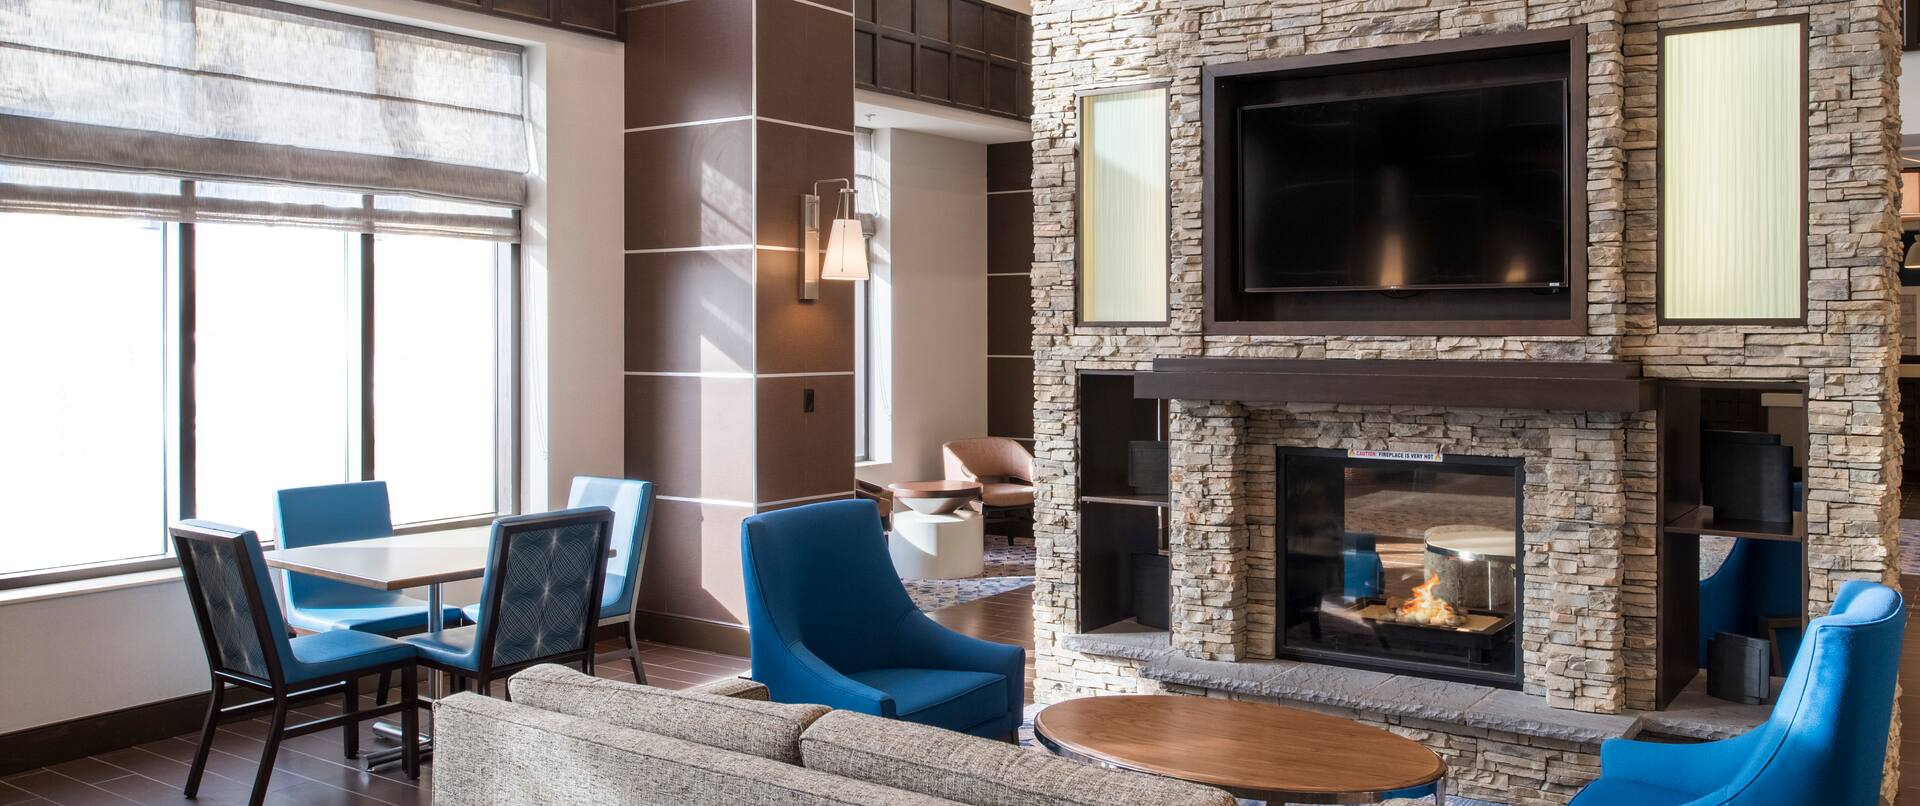 Lobby Seating Area with Fireplace and Television